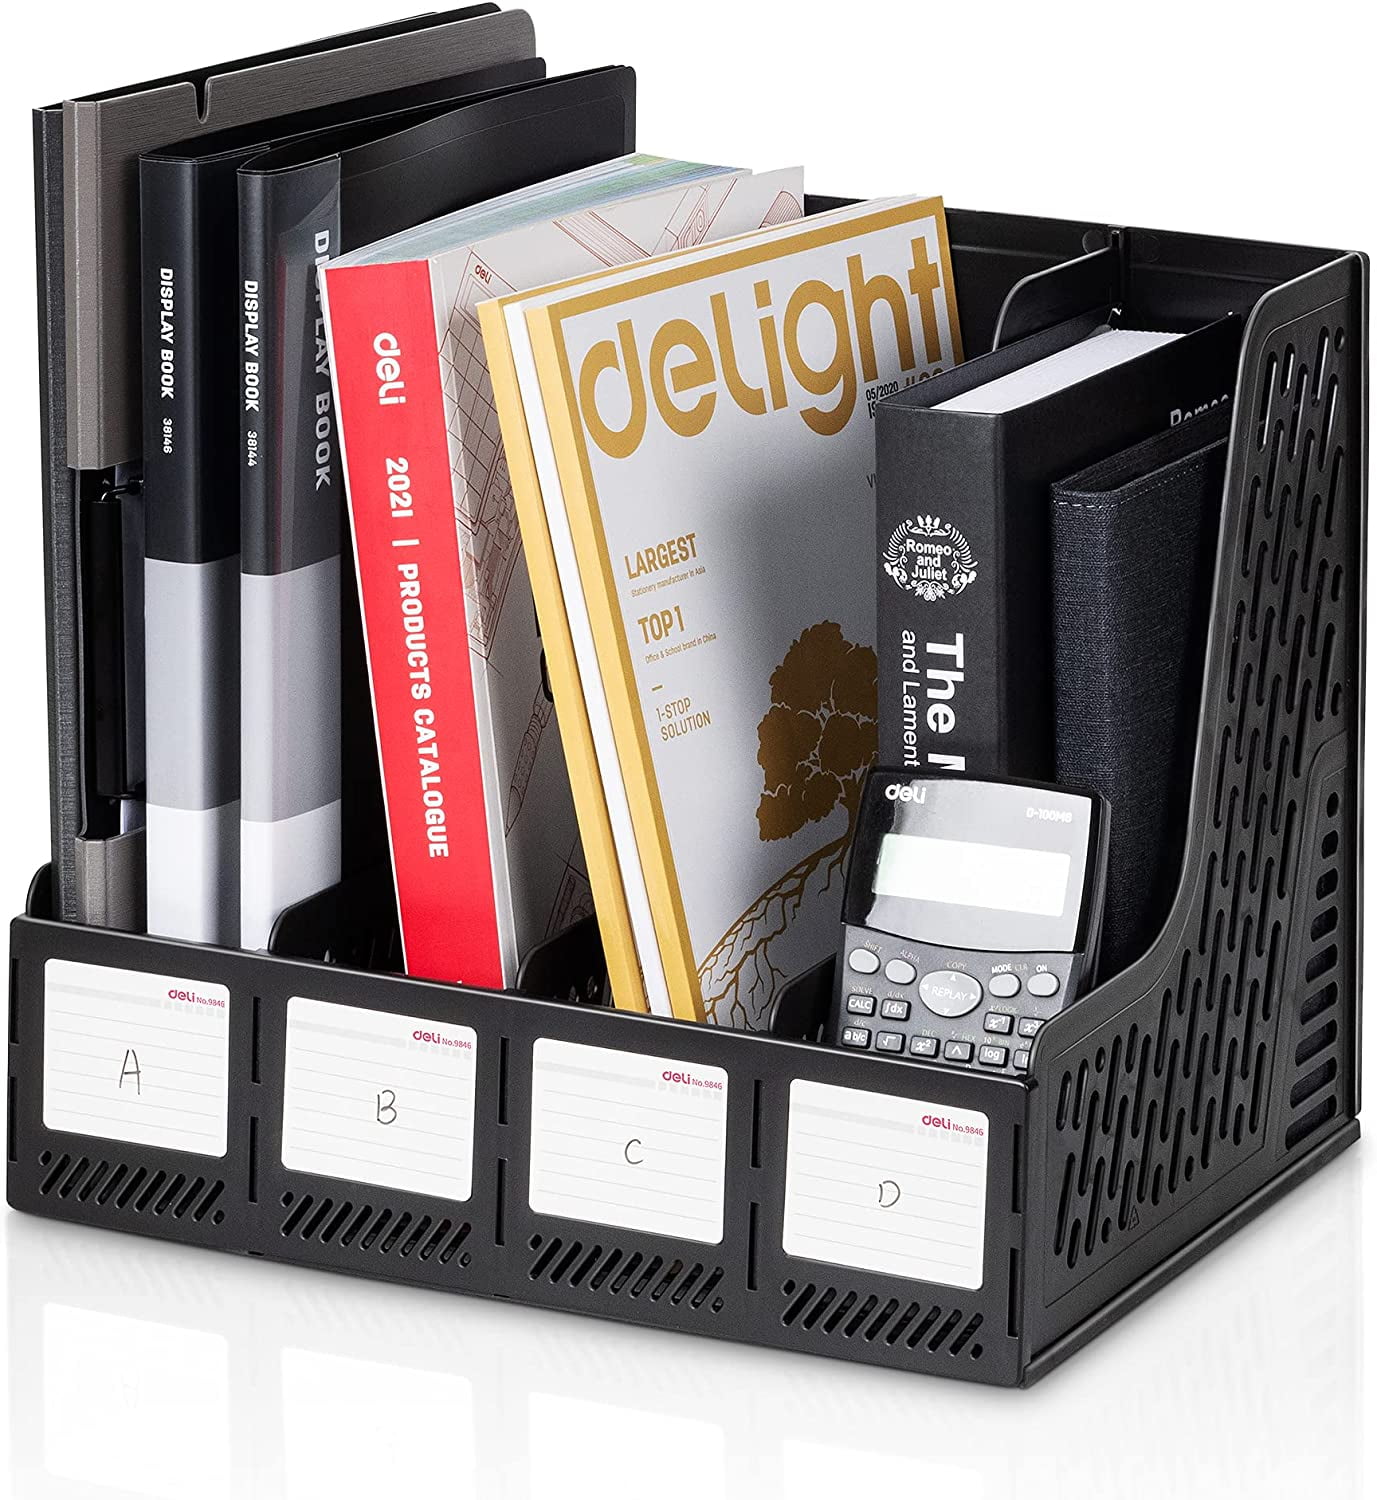 Heavy-Duty Desk Paper Organizer Great For Students and Teacher Home or Just Any Office Organization Magazine Holder Set Of 4 File Holder and Magazine Rack Grey 